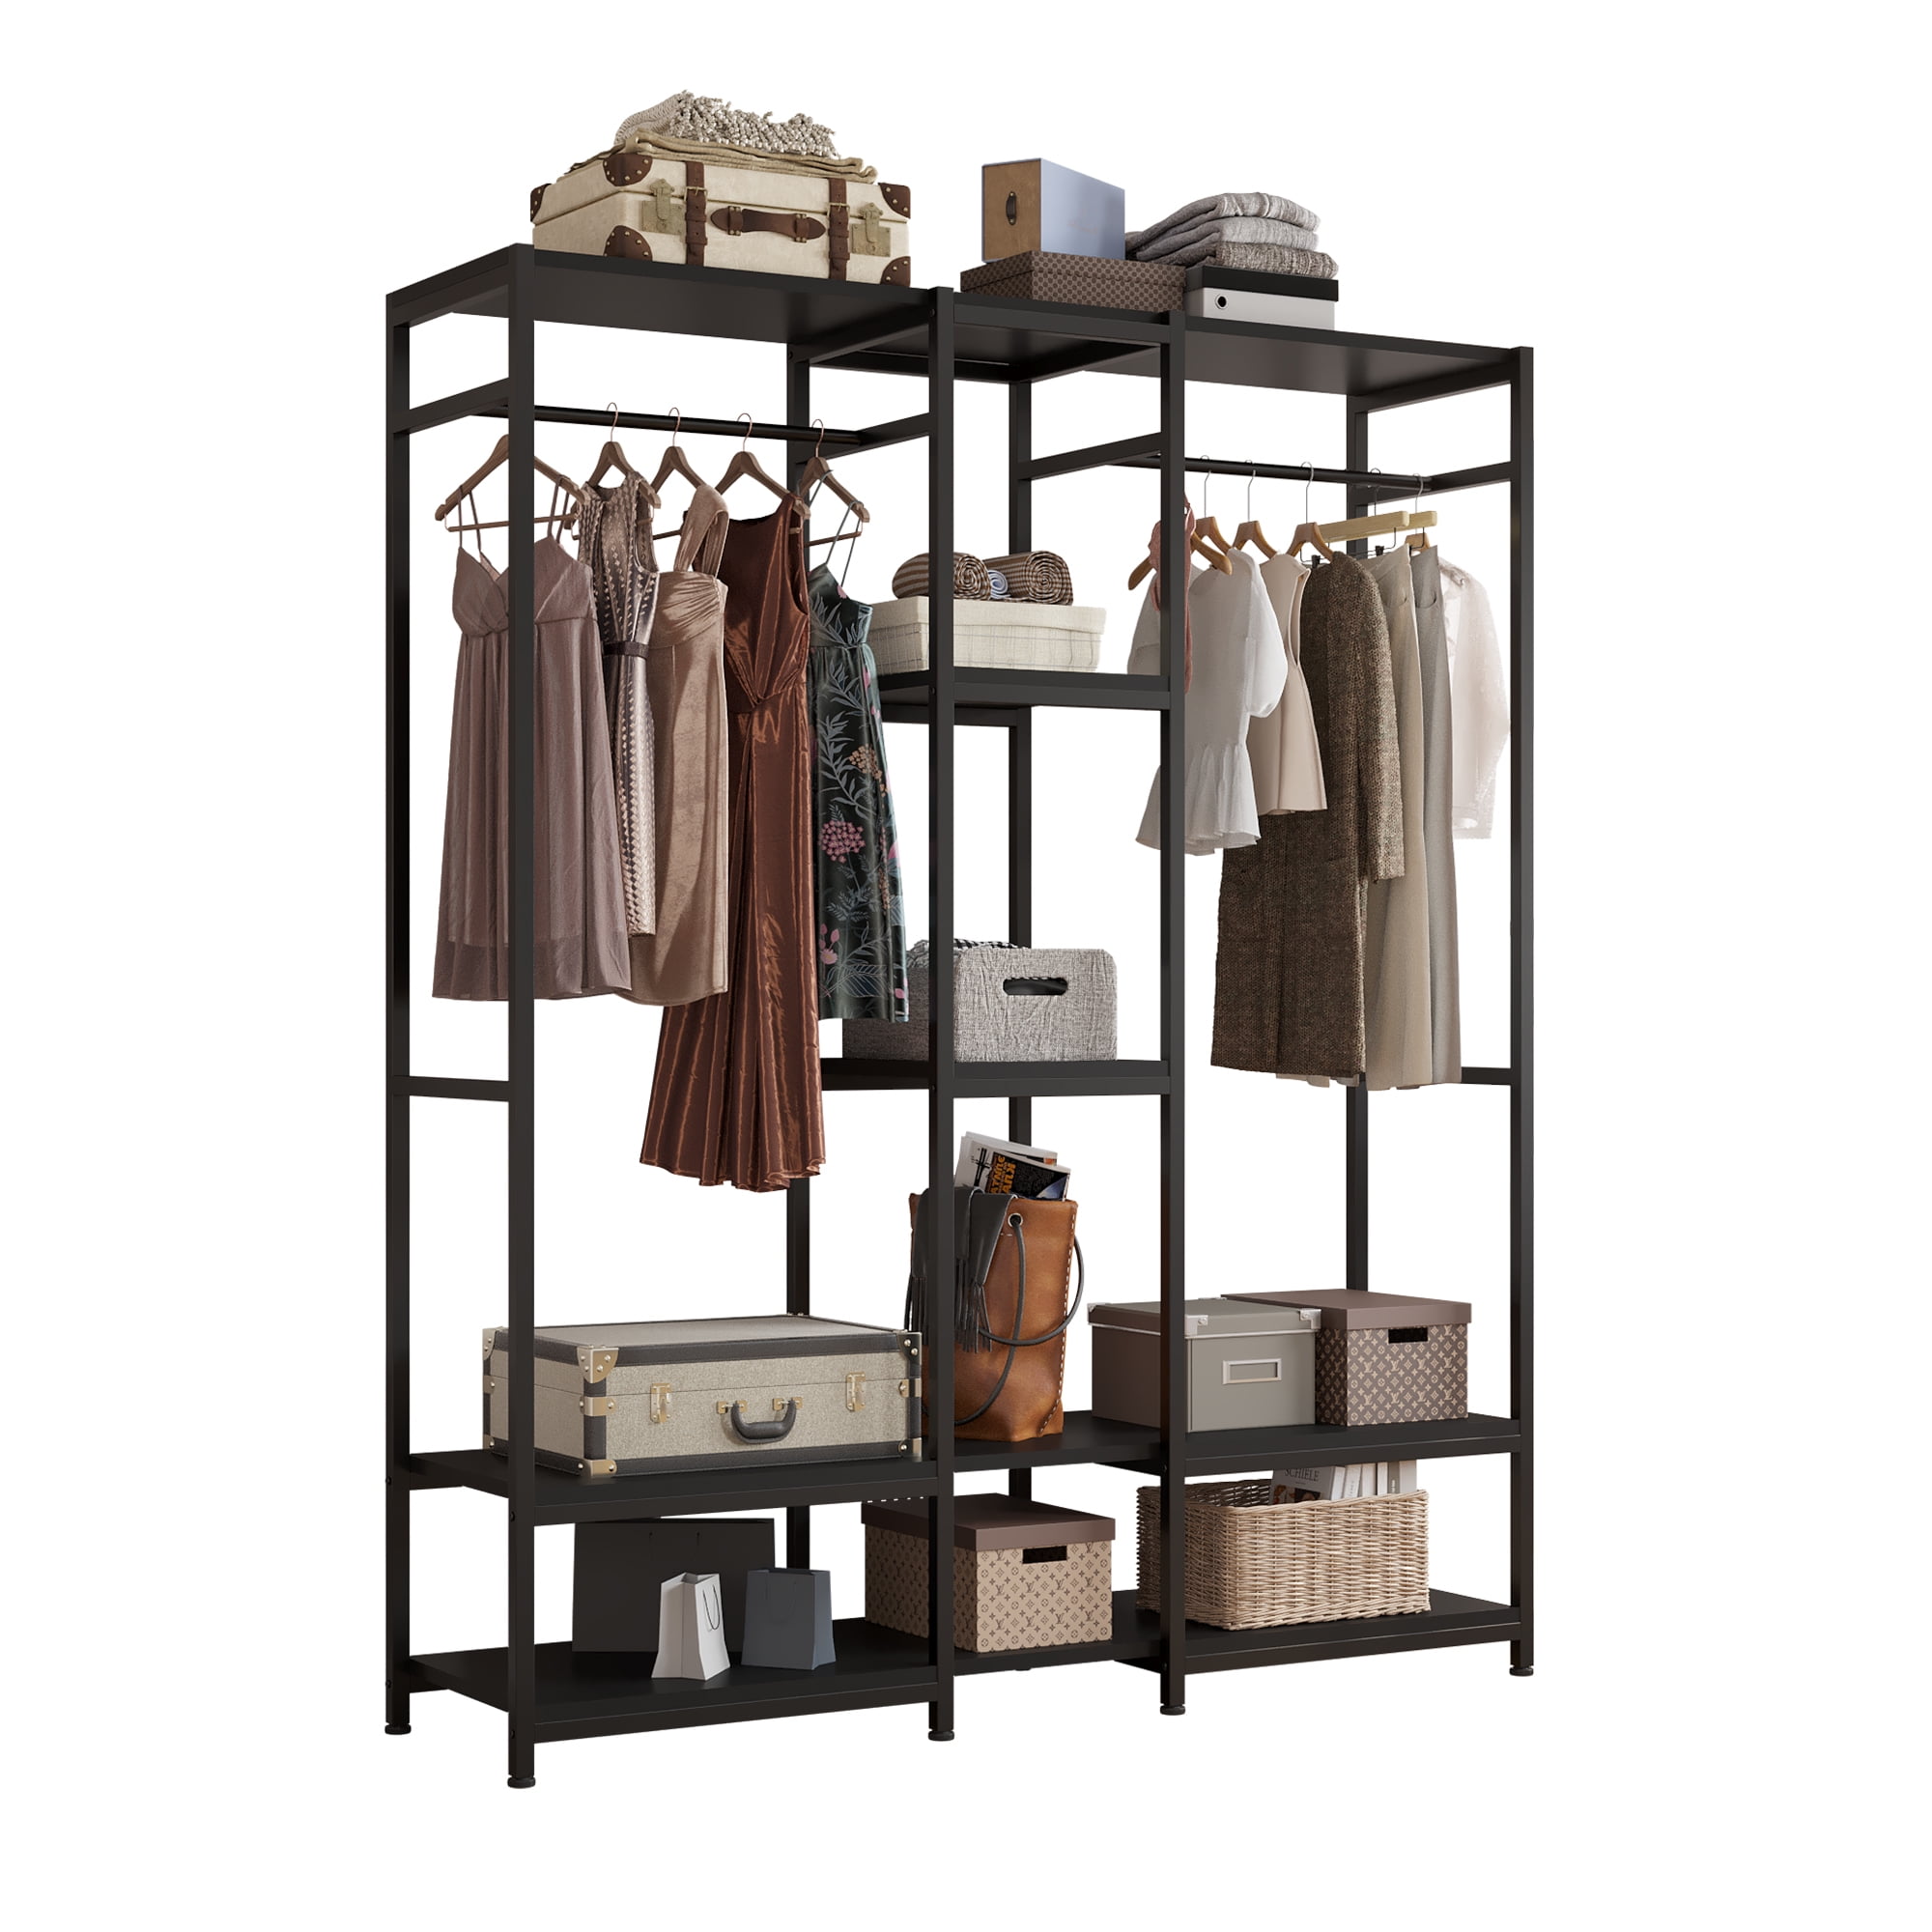 JOMEED Freestanding Closet Clothing Rack Organizer with Shelves and Hanging Rod